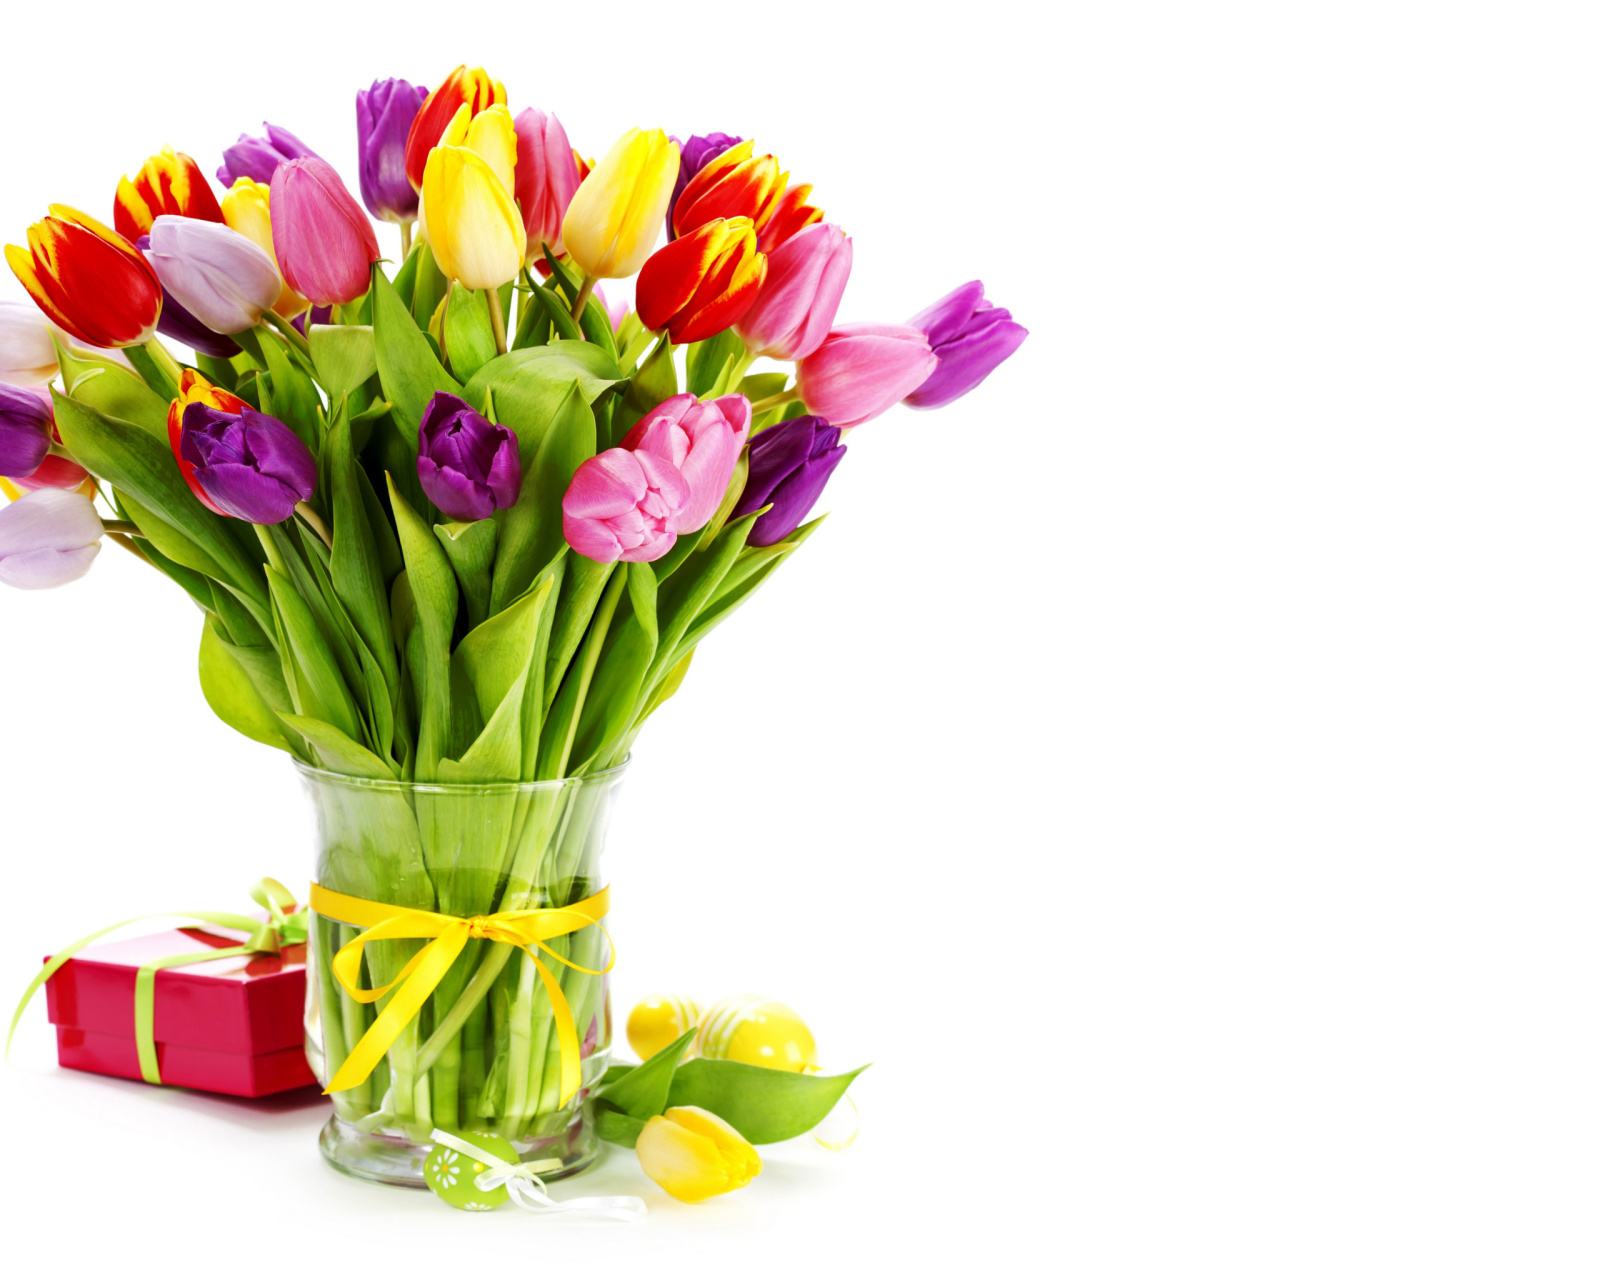 Tulips Bouquet and Gift wallpaper 1600x1280